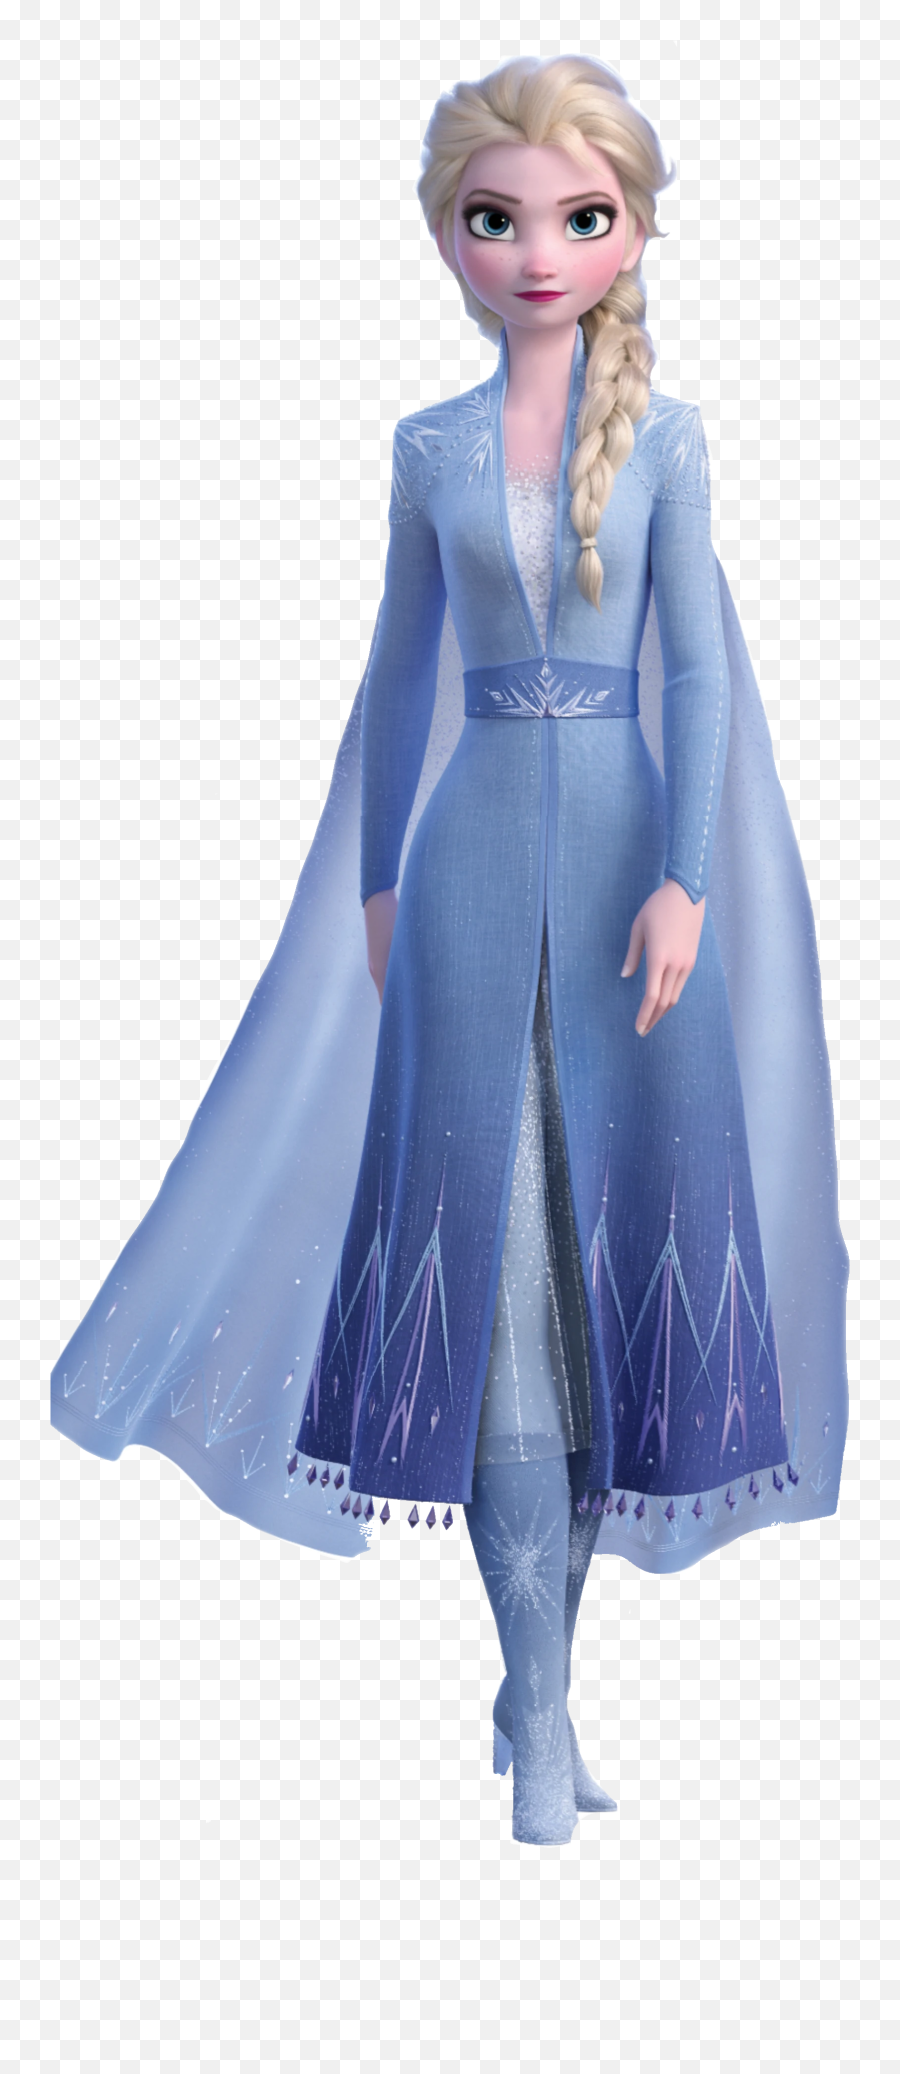 Elsa The Snow Queen Character - Community Wiki Fandom Elsa Frozen 2 Blue Dress Emoji,How To Sing Let It Go With Emotion